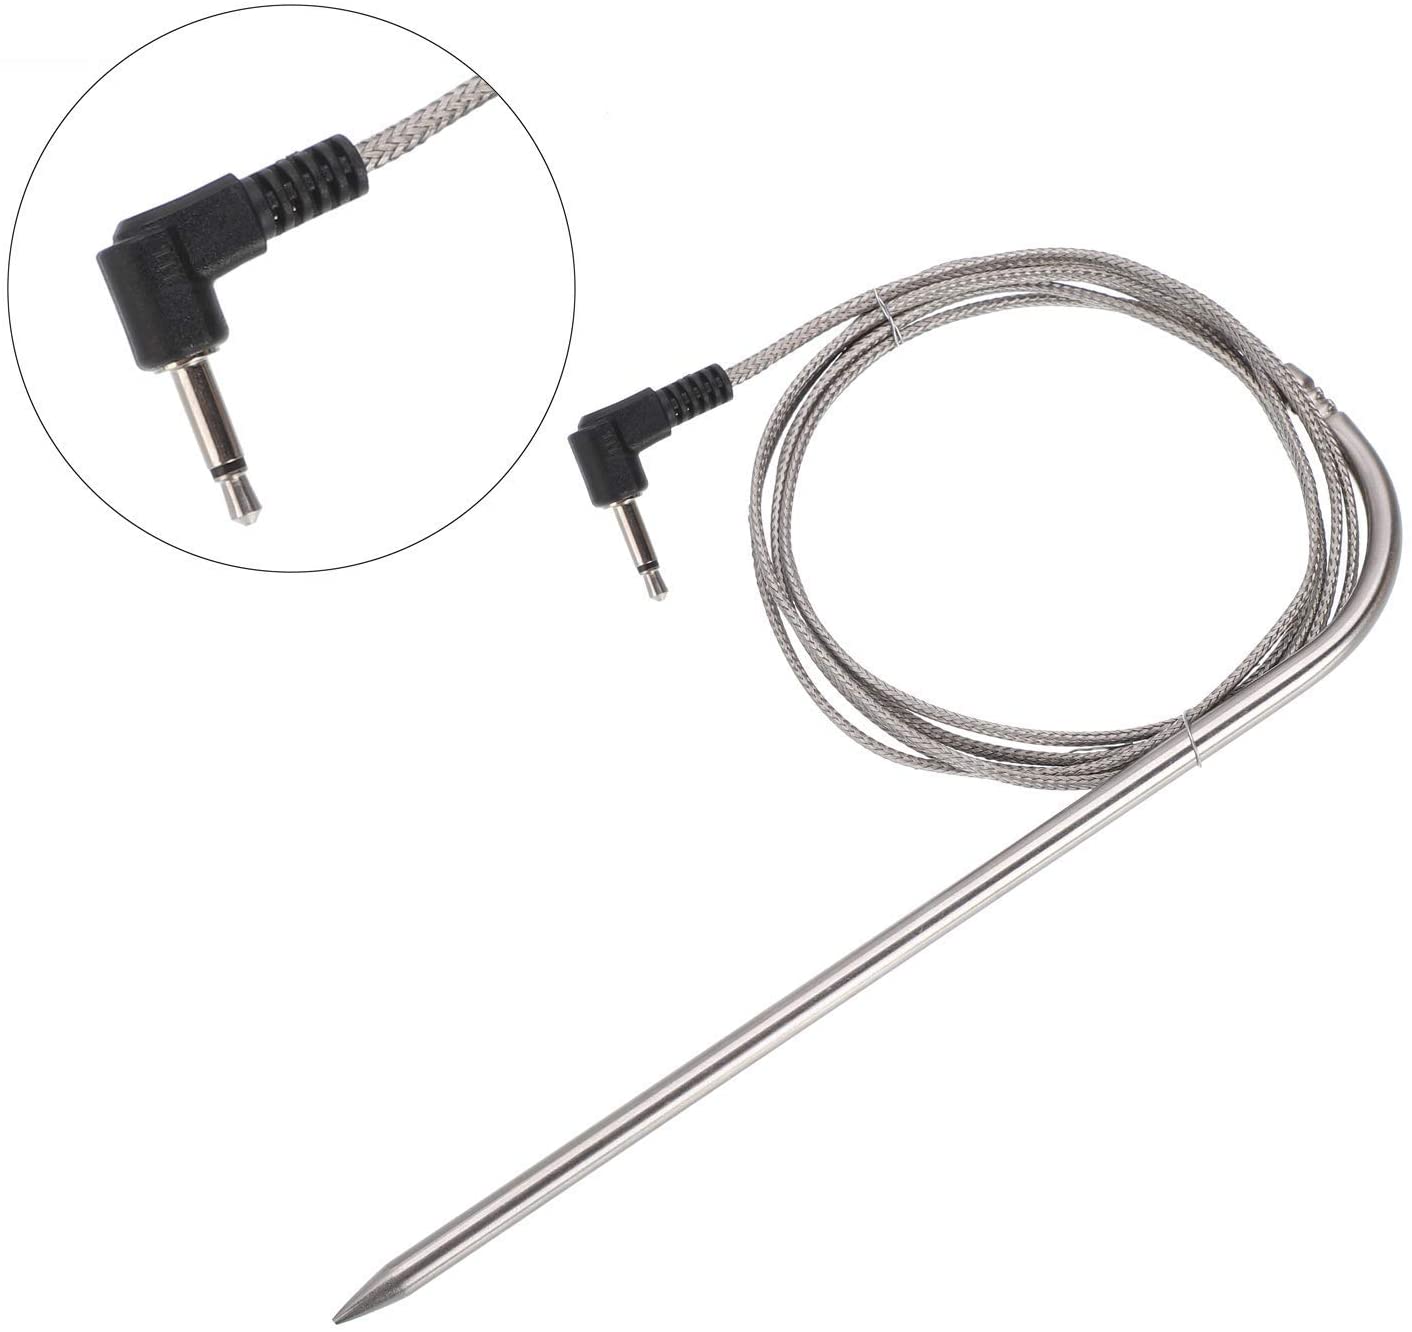 GrillPartsReplacement - Online BBQ Parts Retailer 3.5mm Plug Meat Probe for Pit Boss Navigator 700 (PB700G) Grills, Replacement High Temperature BBQ Digital Thermostat Meat Probes